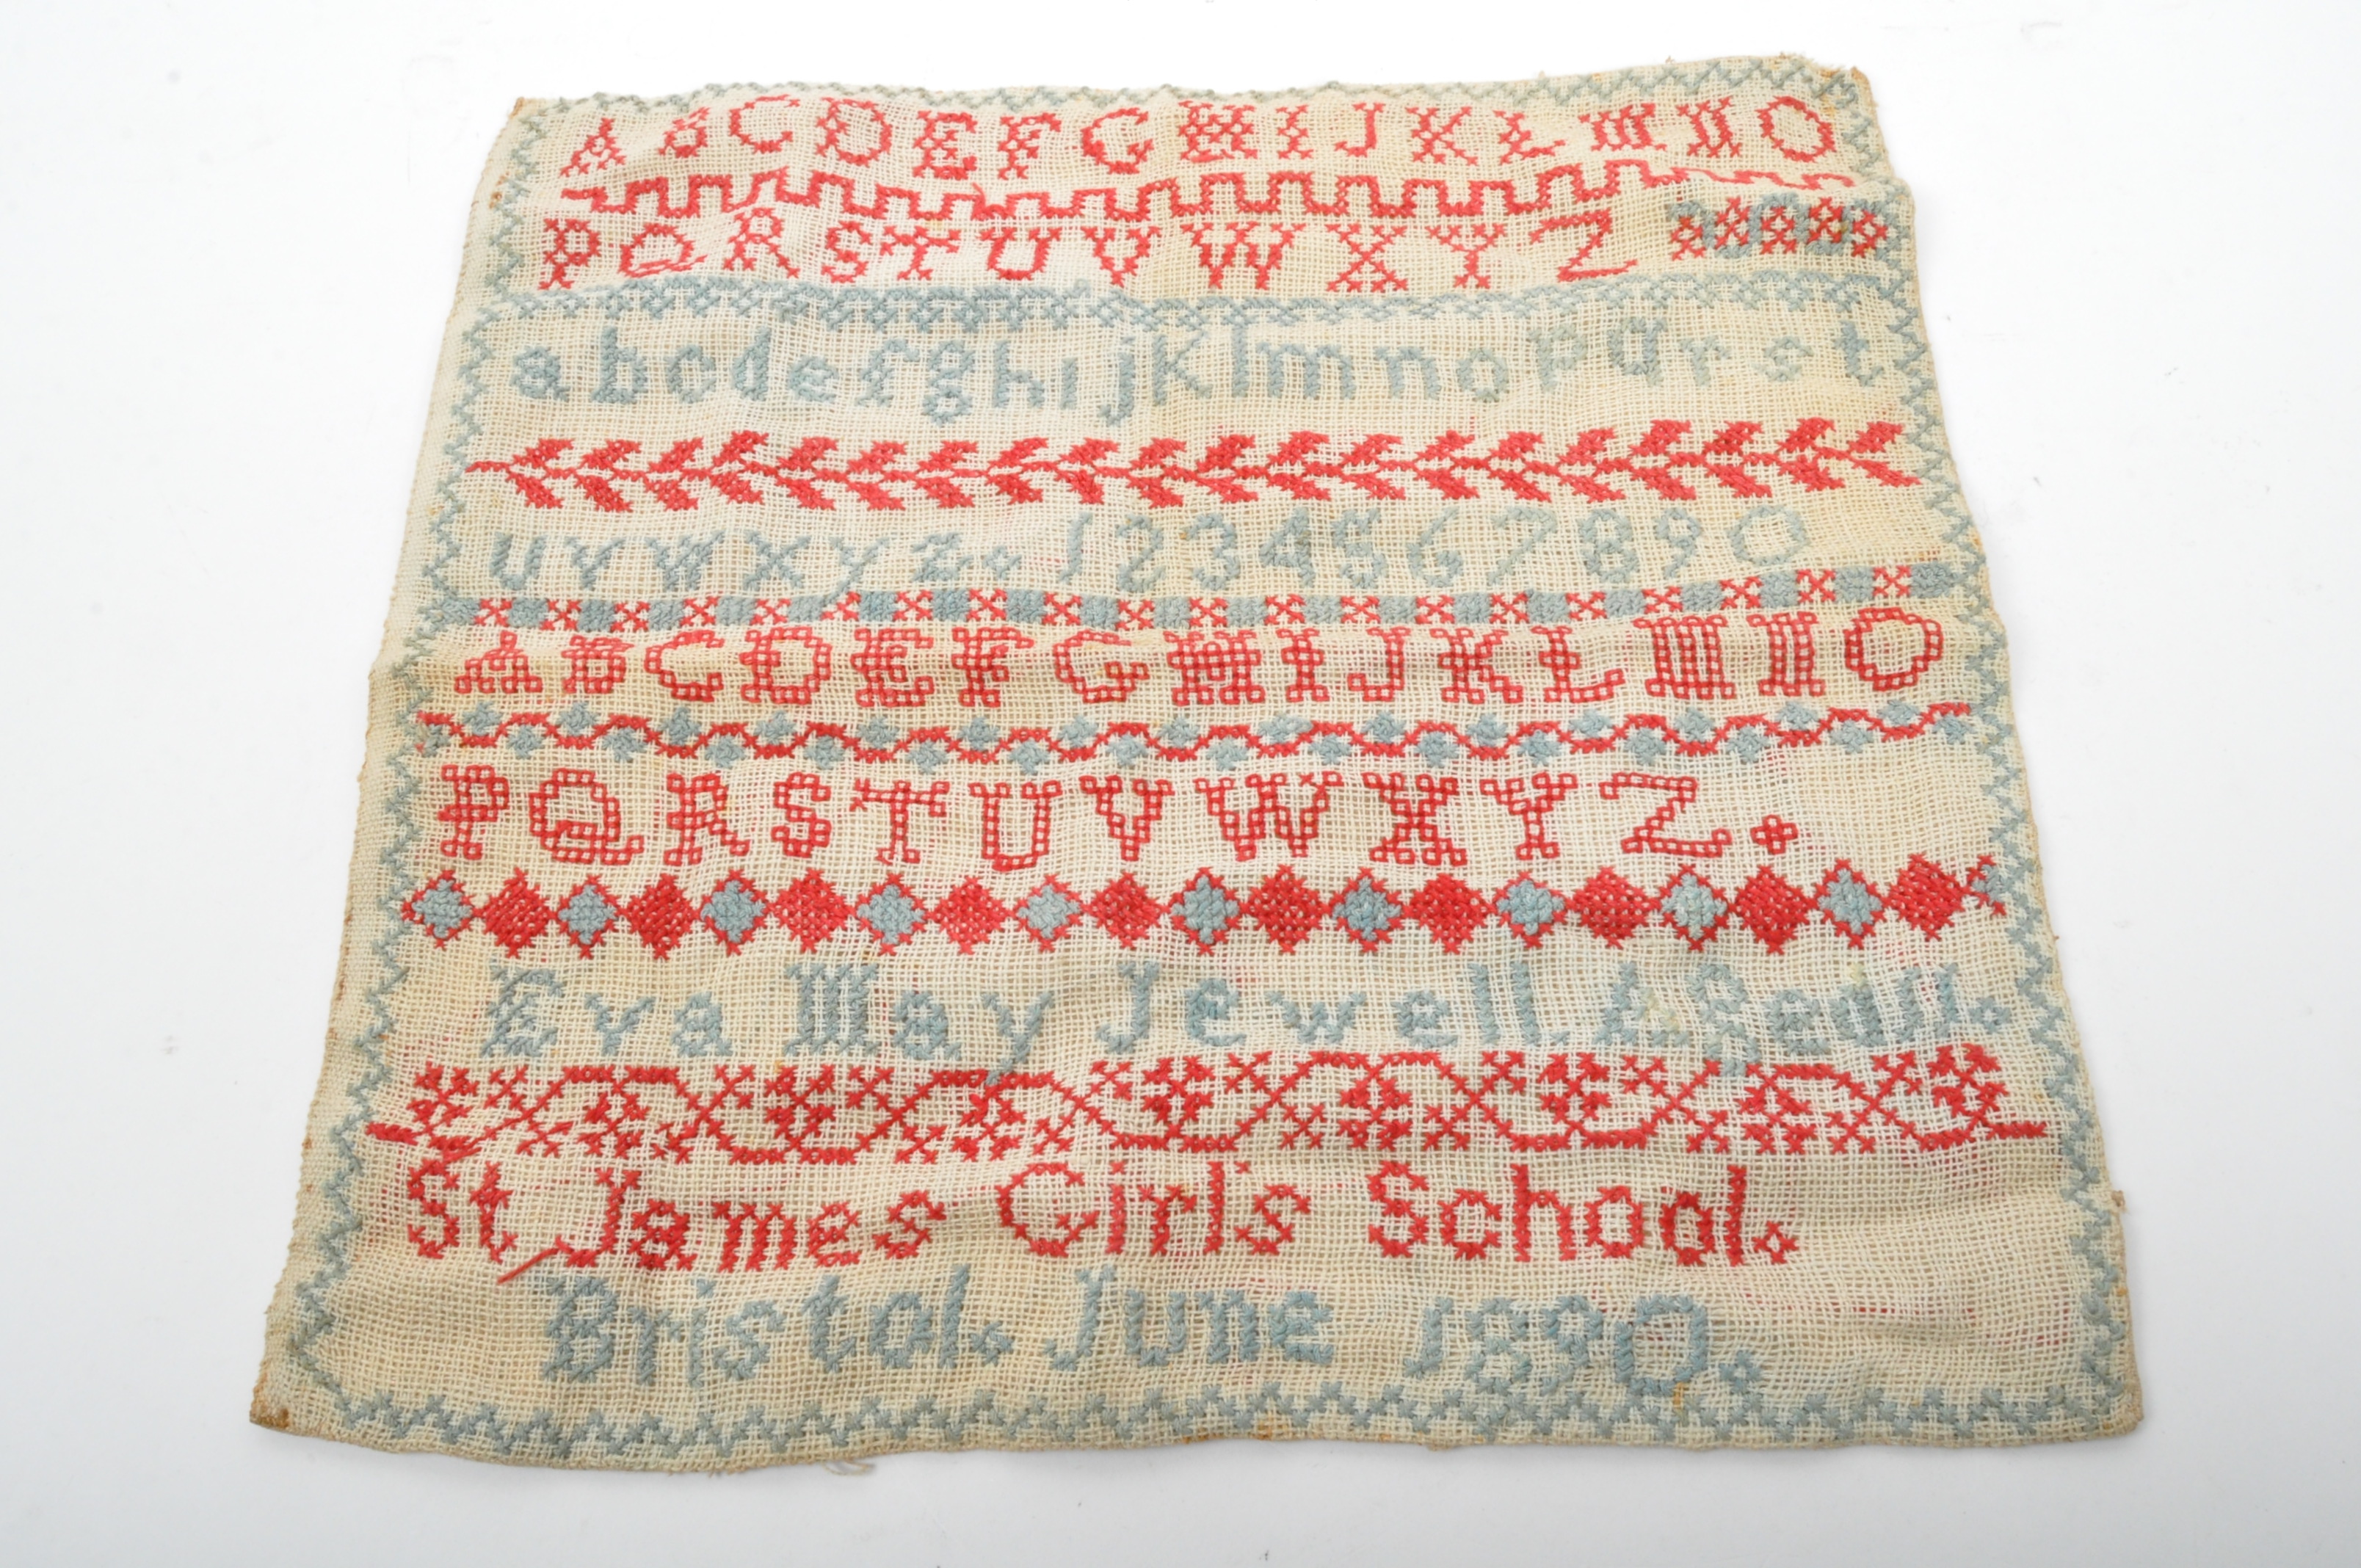 VICTORIAN LATE 19TH CENTURY NEEDLE POINT SAMPLER